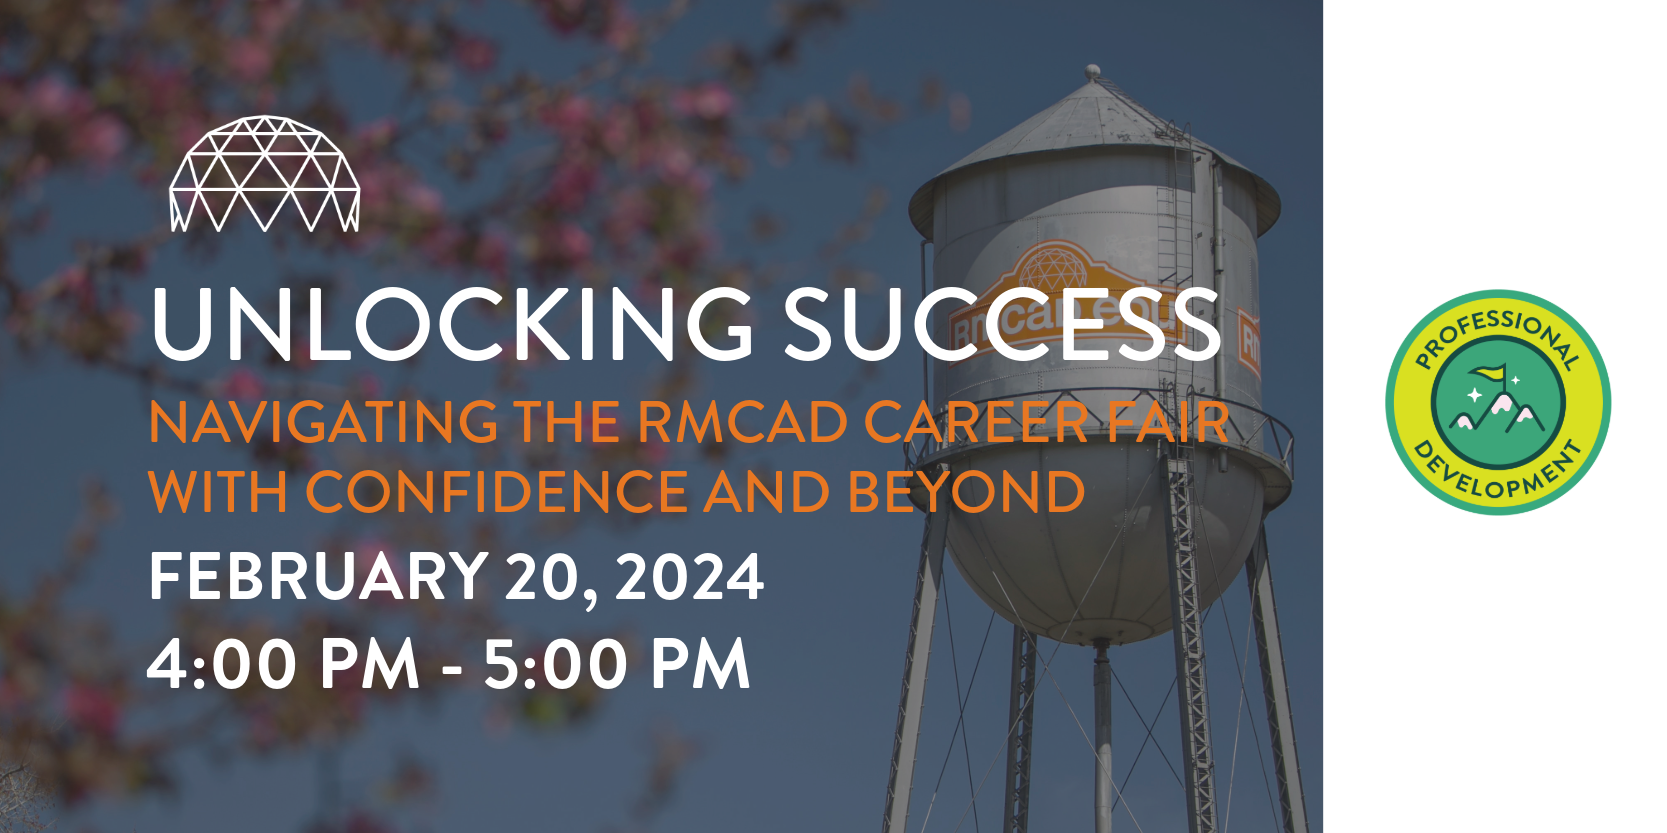 Unlocking Success: Navigating the RMCAD Career Fair with Confidence and Beyond